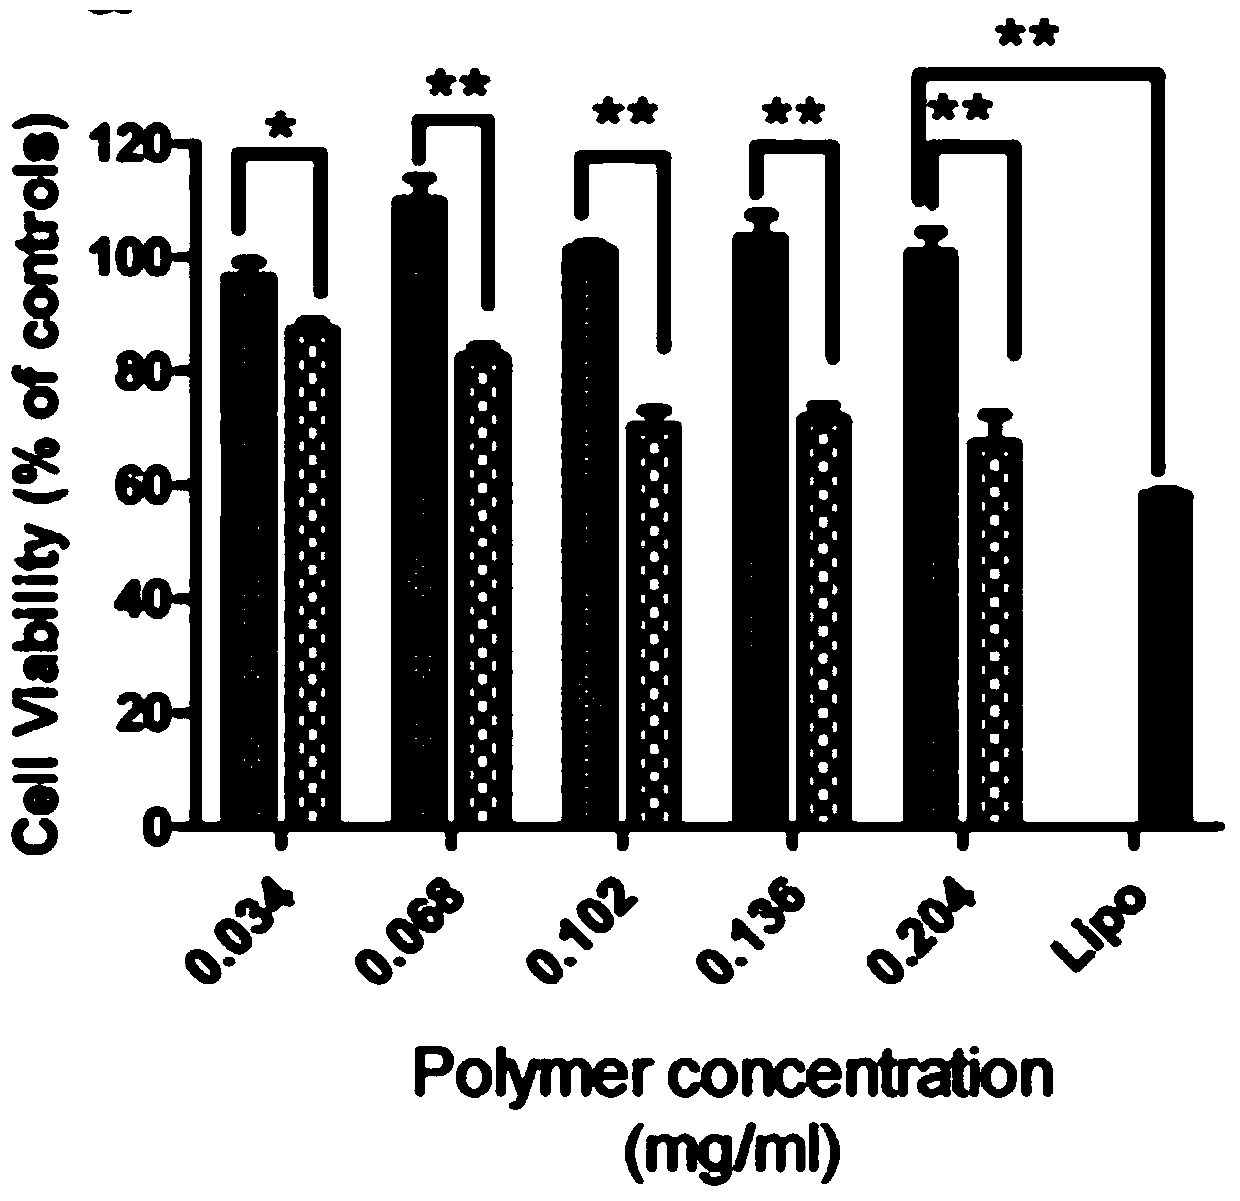 Recombinant plasmids based on polyethylene glycol-polylactic acid glycolic acid-polylysine composite nanomaterials and their preparation and application